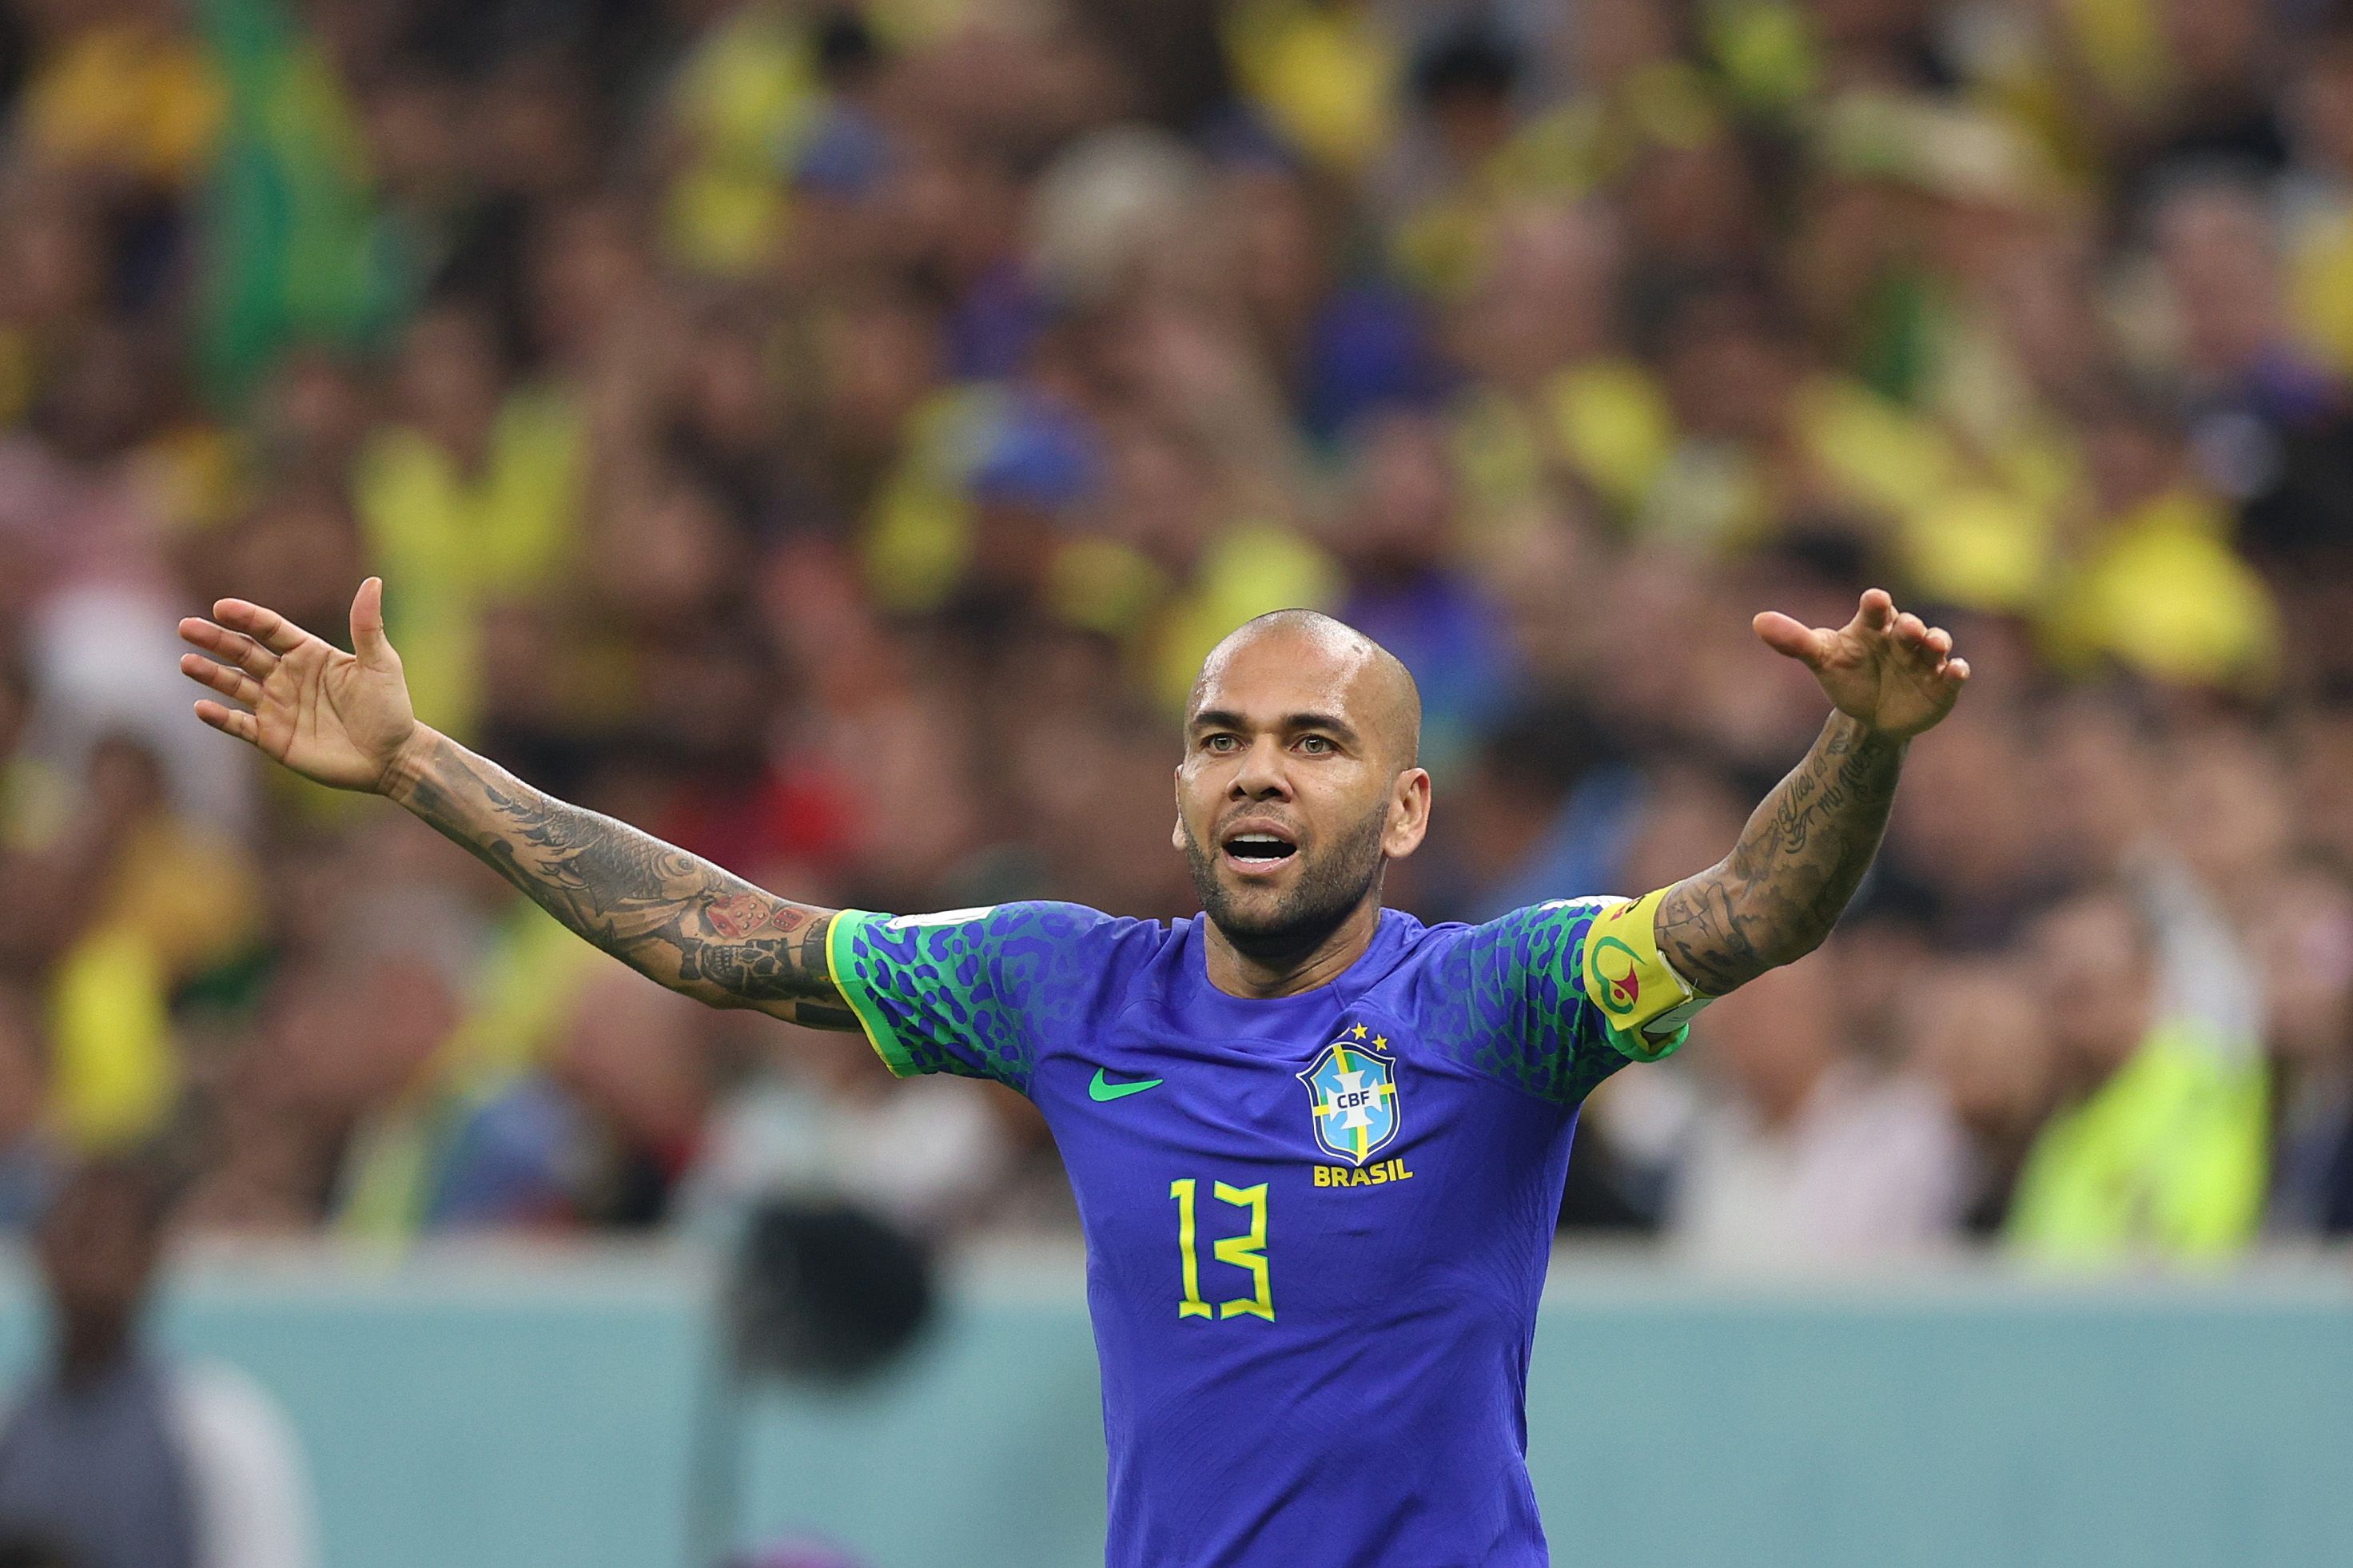 Dani Alves of Brazil in action during the FIFA World Cup Qatar 2022 Group G match between Cameroon and Brazil at Lusail Stadium on December 02, 2022 in Lusail City, Qatar